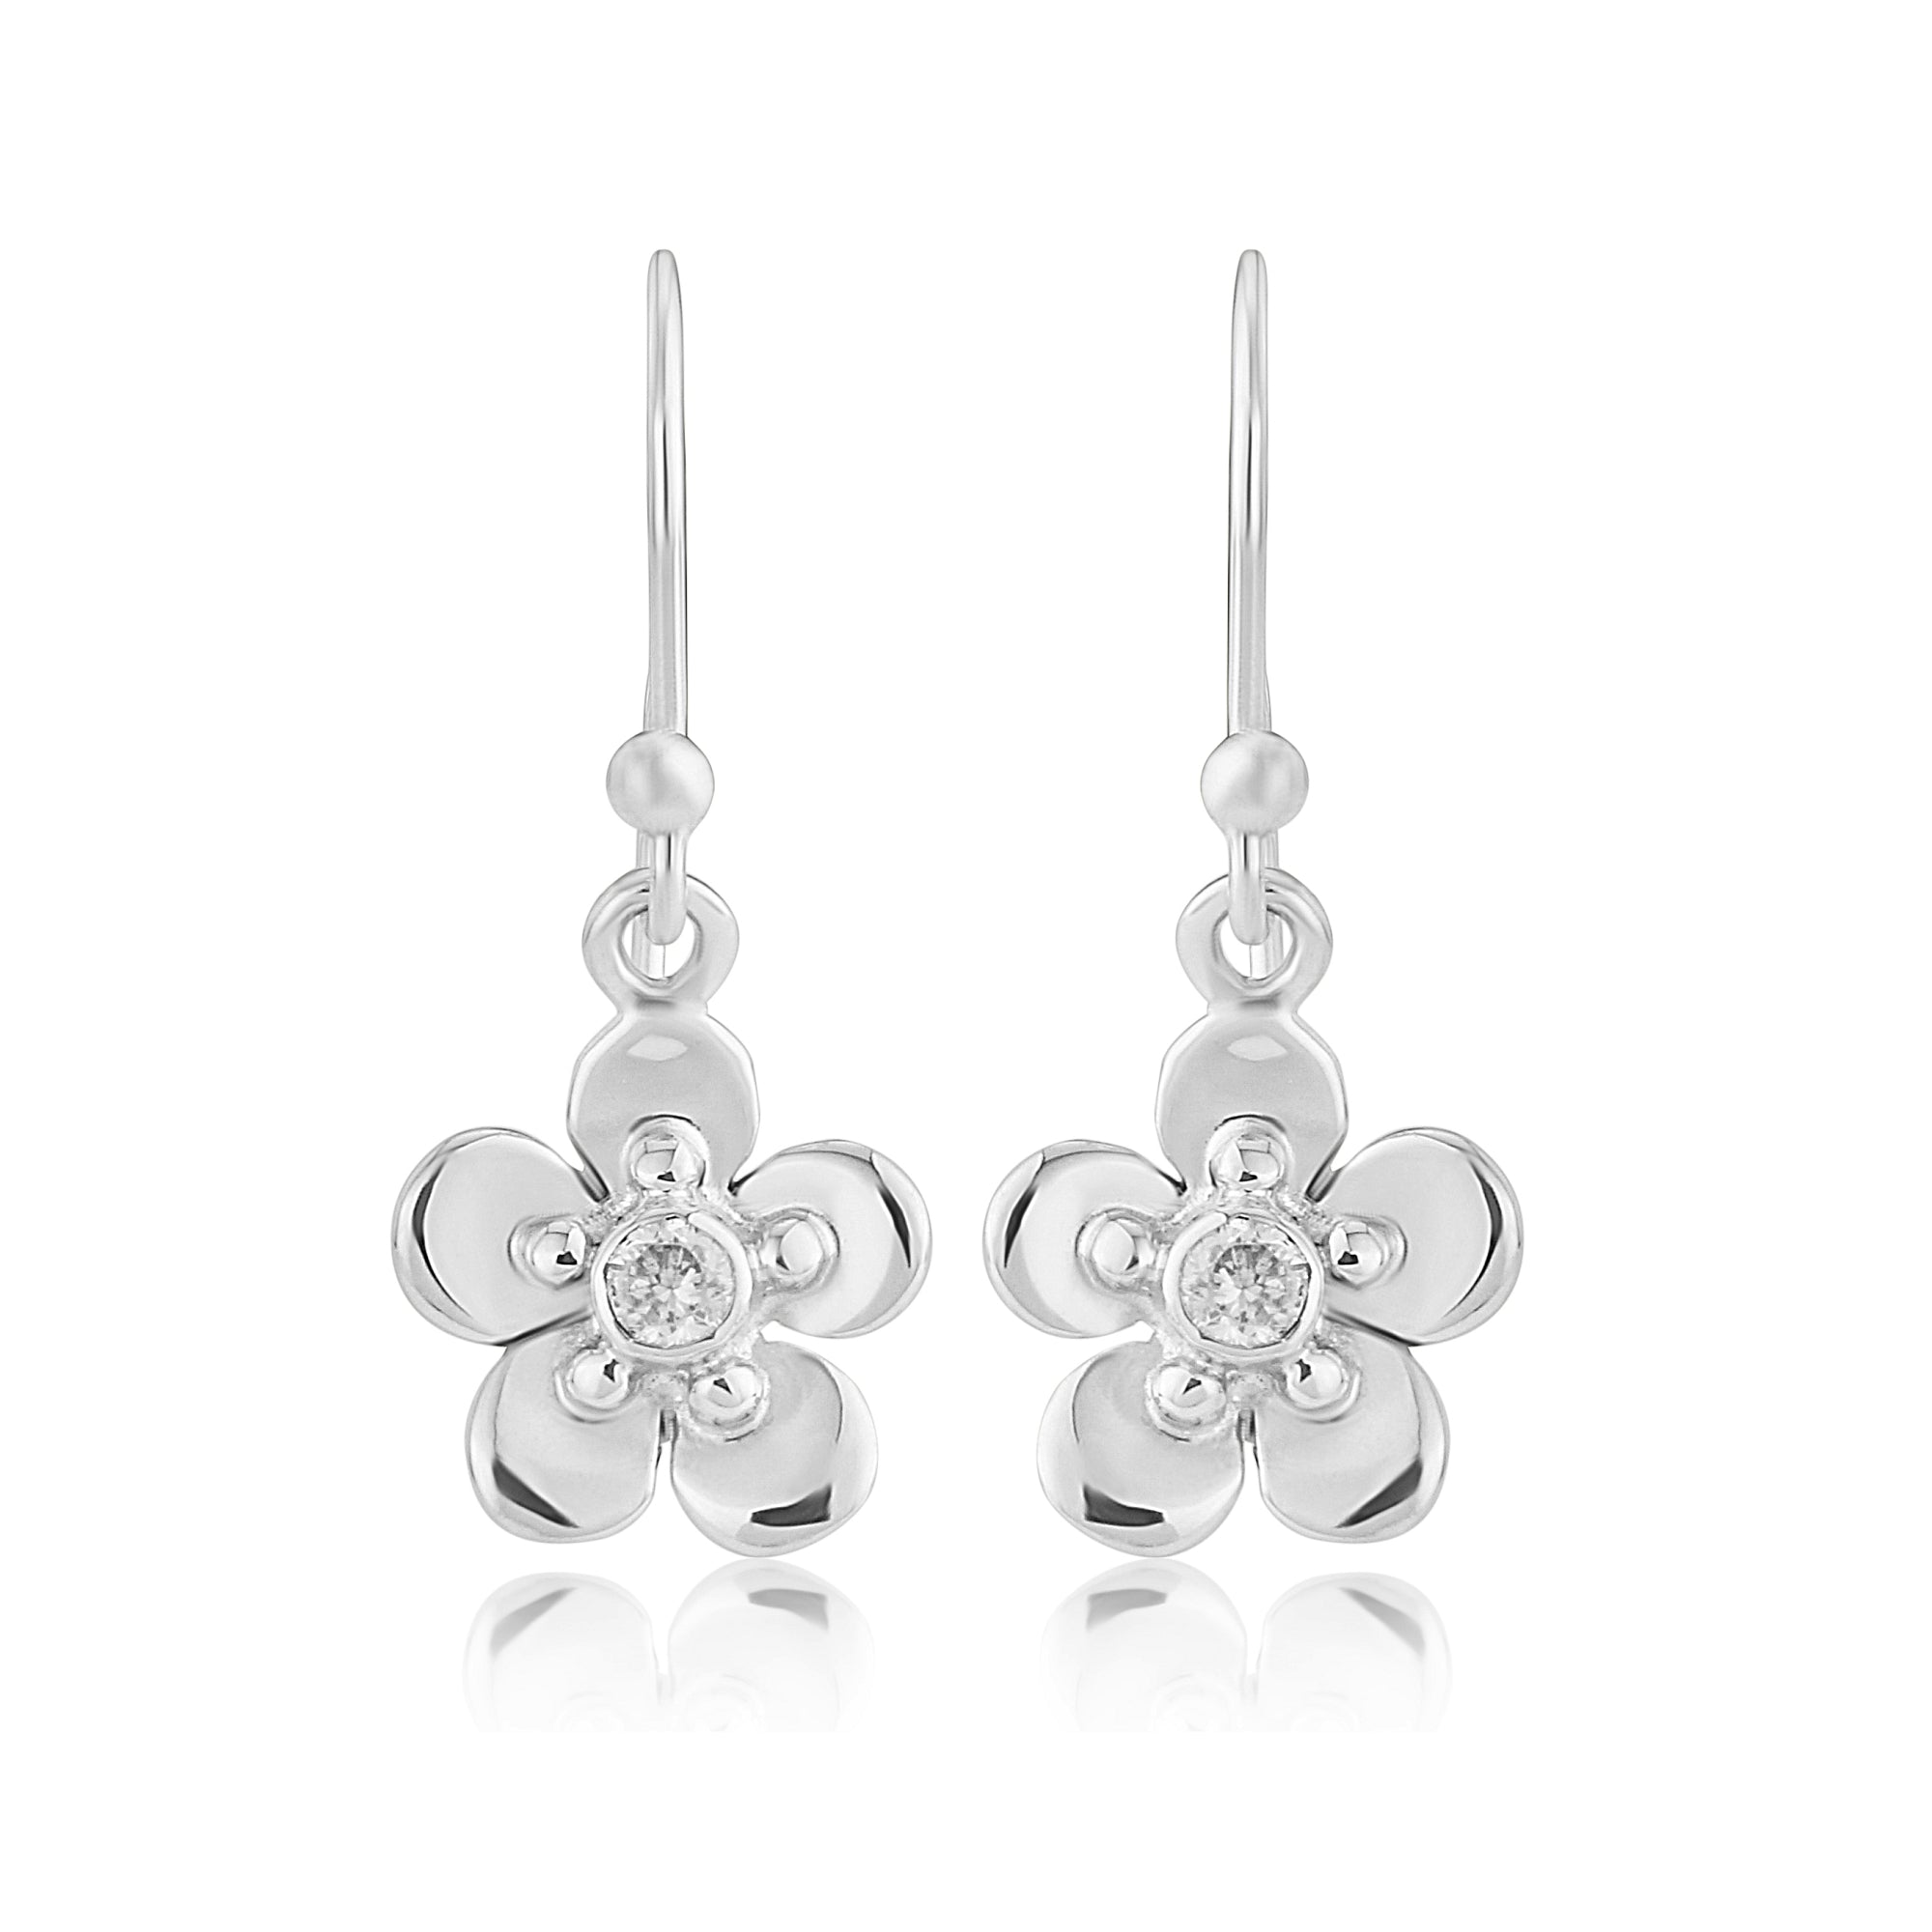 Forget Me Not silver small drop earrings| Glenna Jewellery Scotland